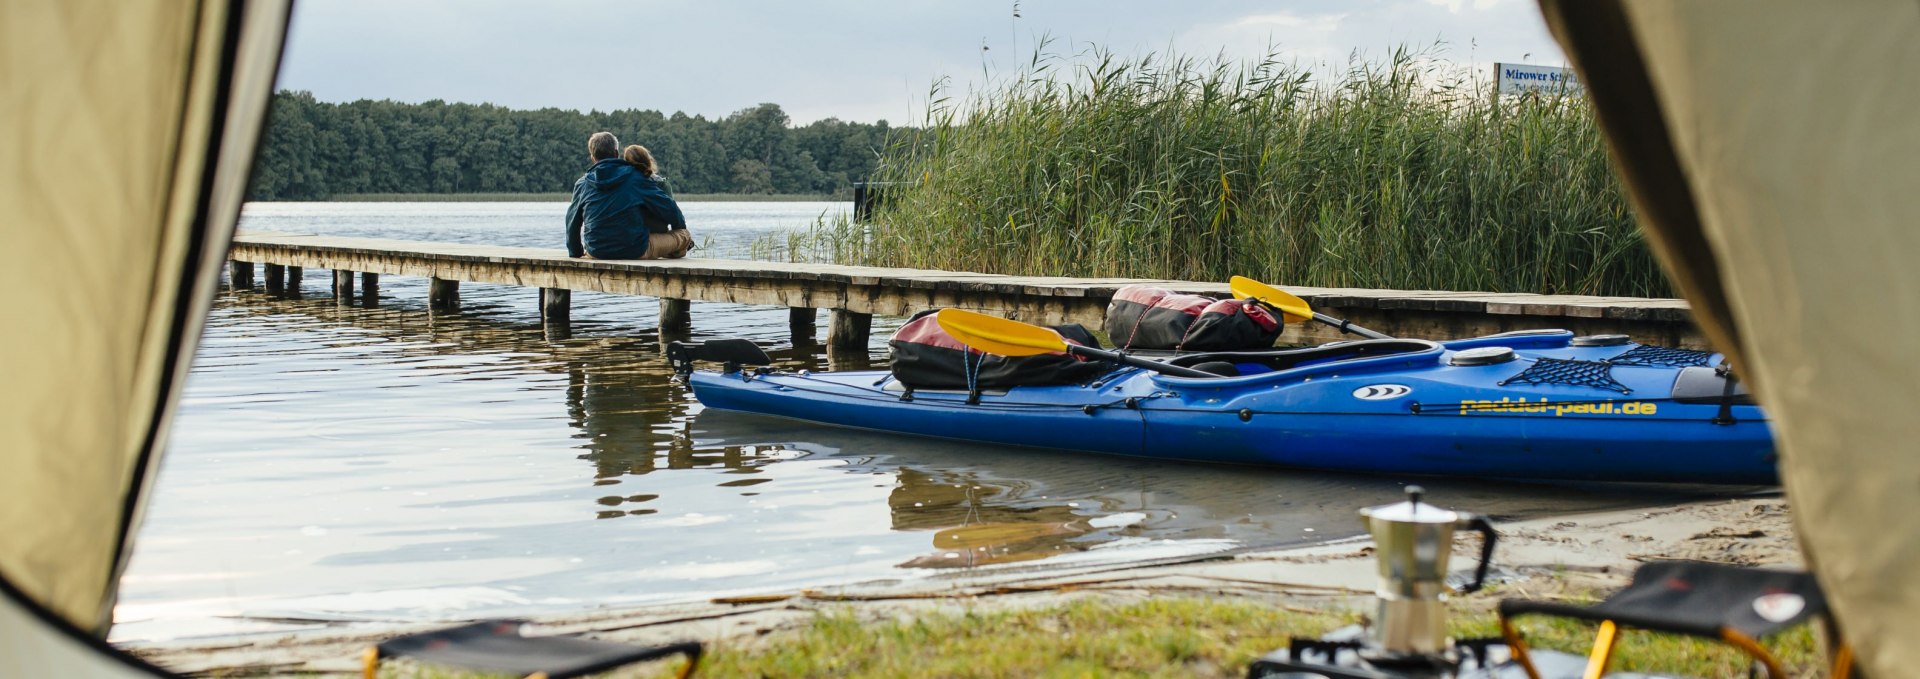 A breather after a day on the water can best be spent at one of the many waterway rest areas, © TMV/Roth